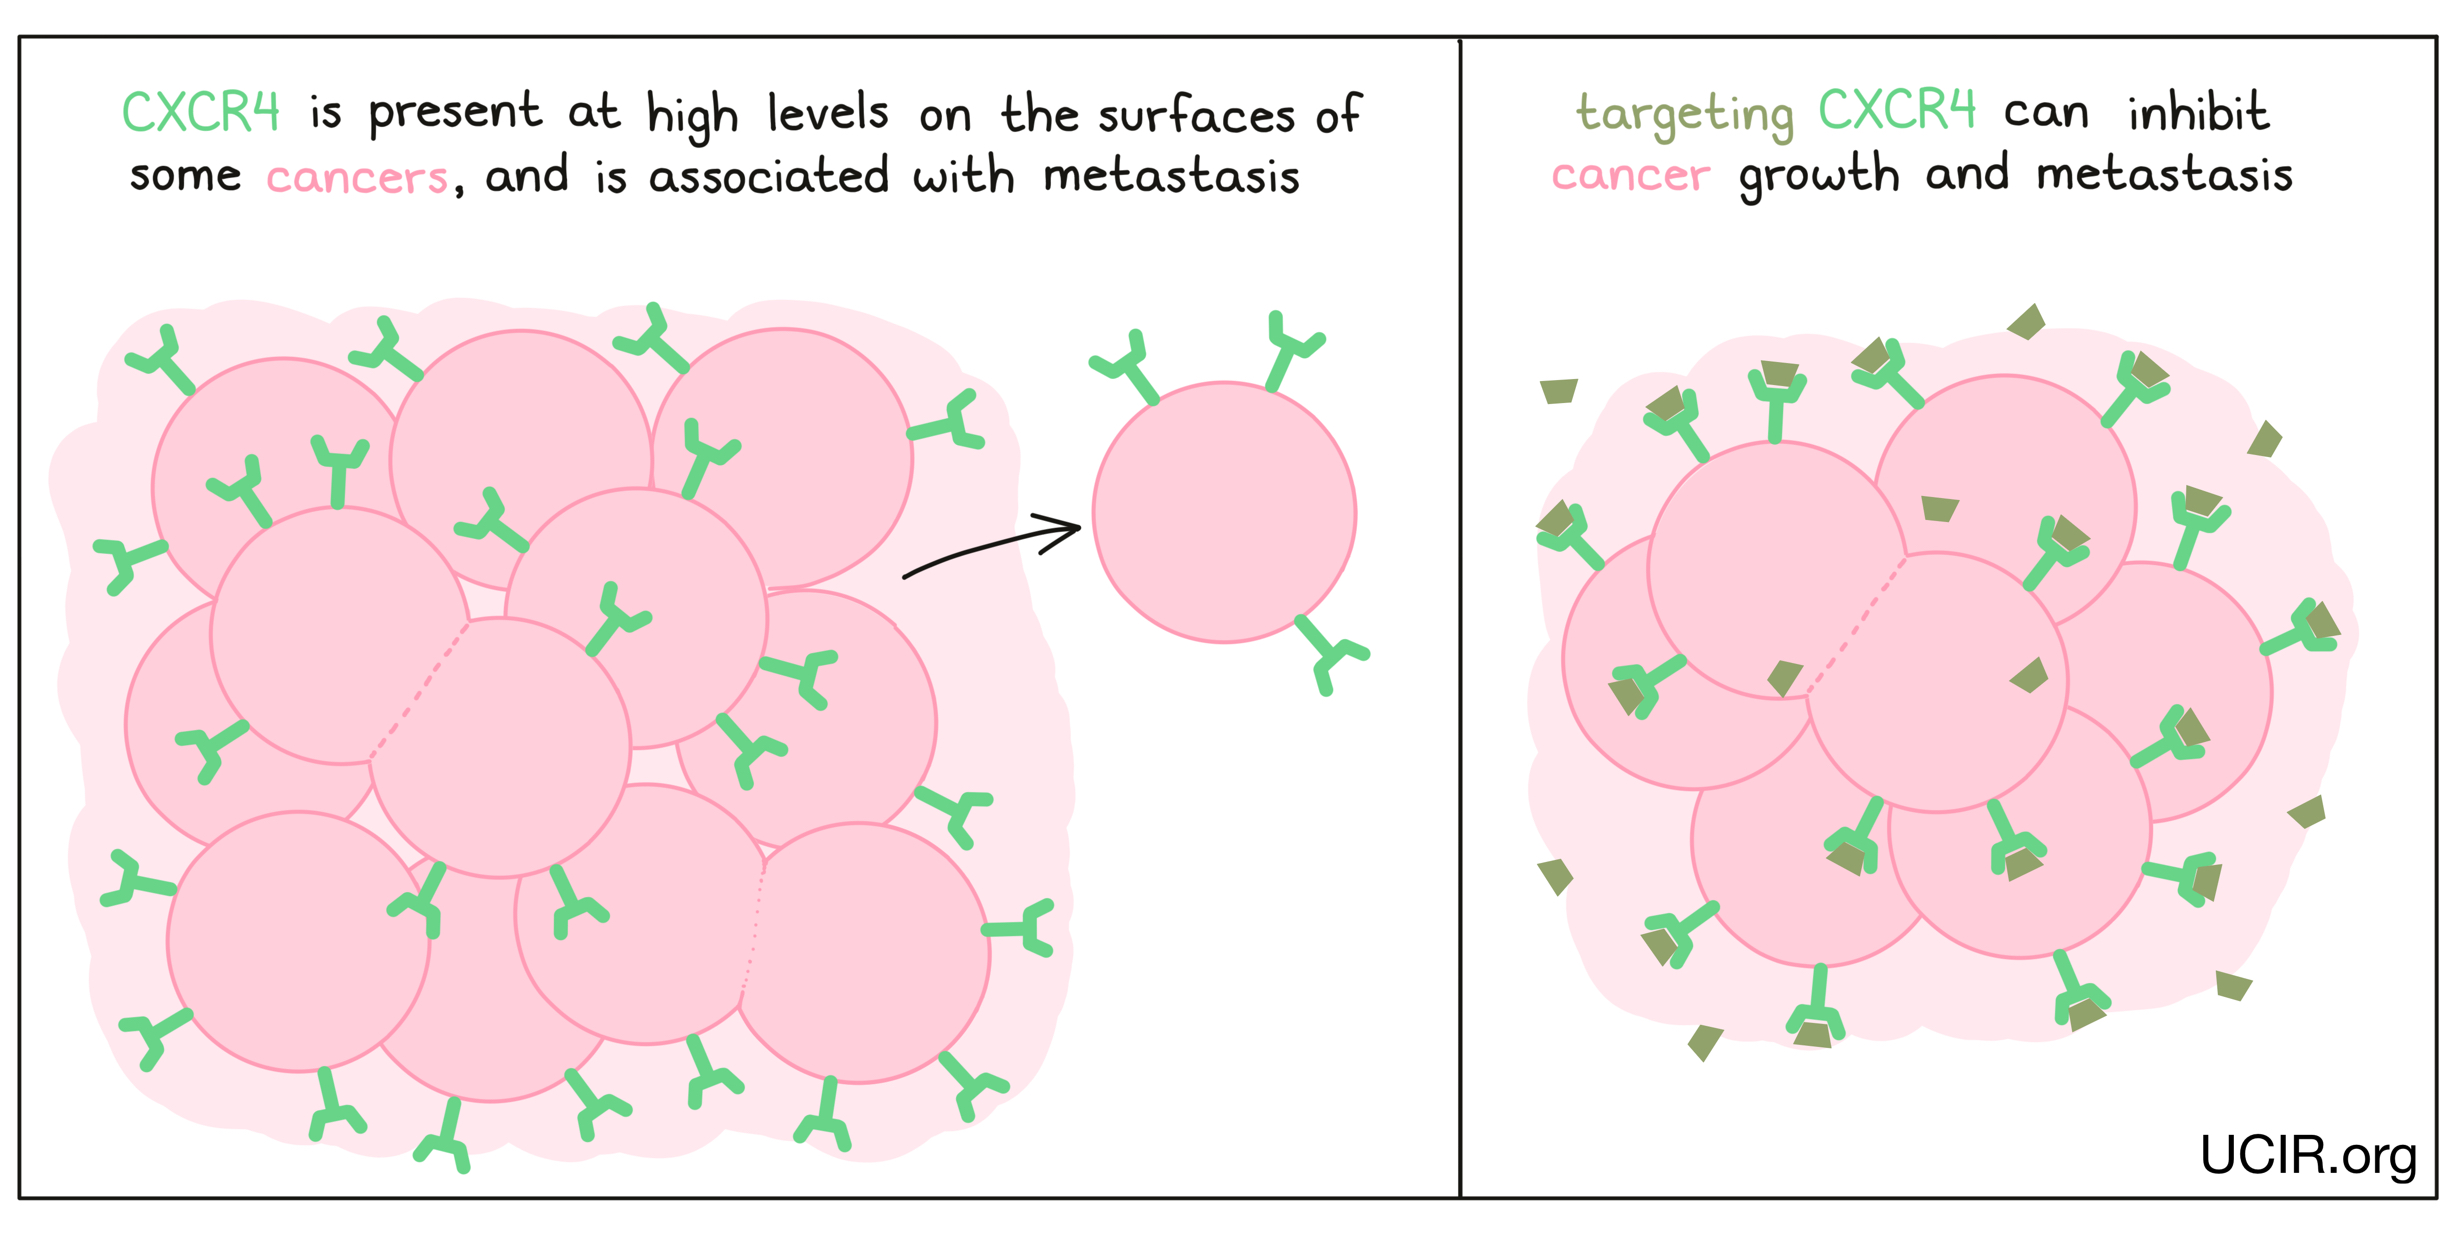 Illustration showing what targeting CXCR4 does